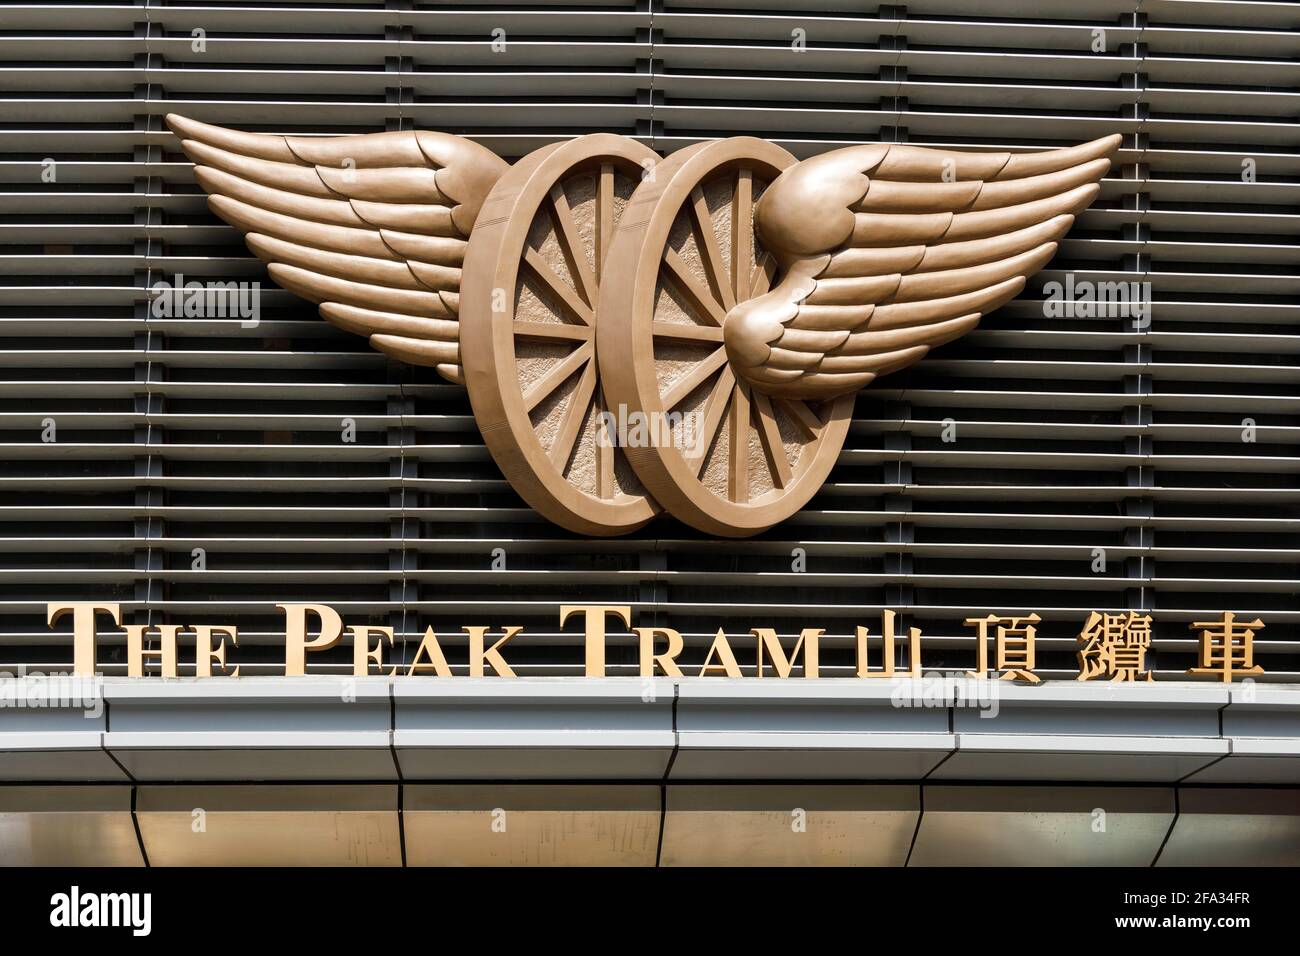 The Peak Tram is a funicular railway in Hong Kong. It runs between Garden Road Admiralty to Victoria Peak. This is the station sign and emblem. Stock Photo